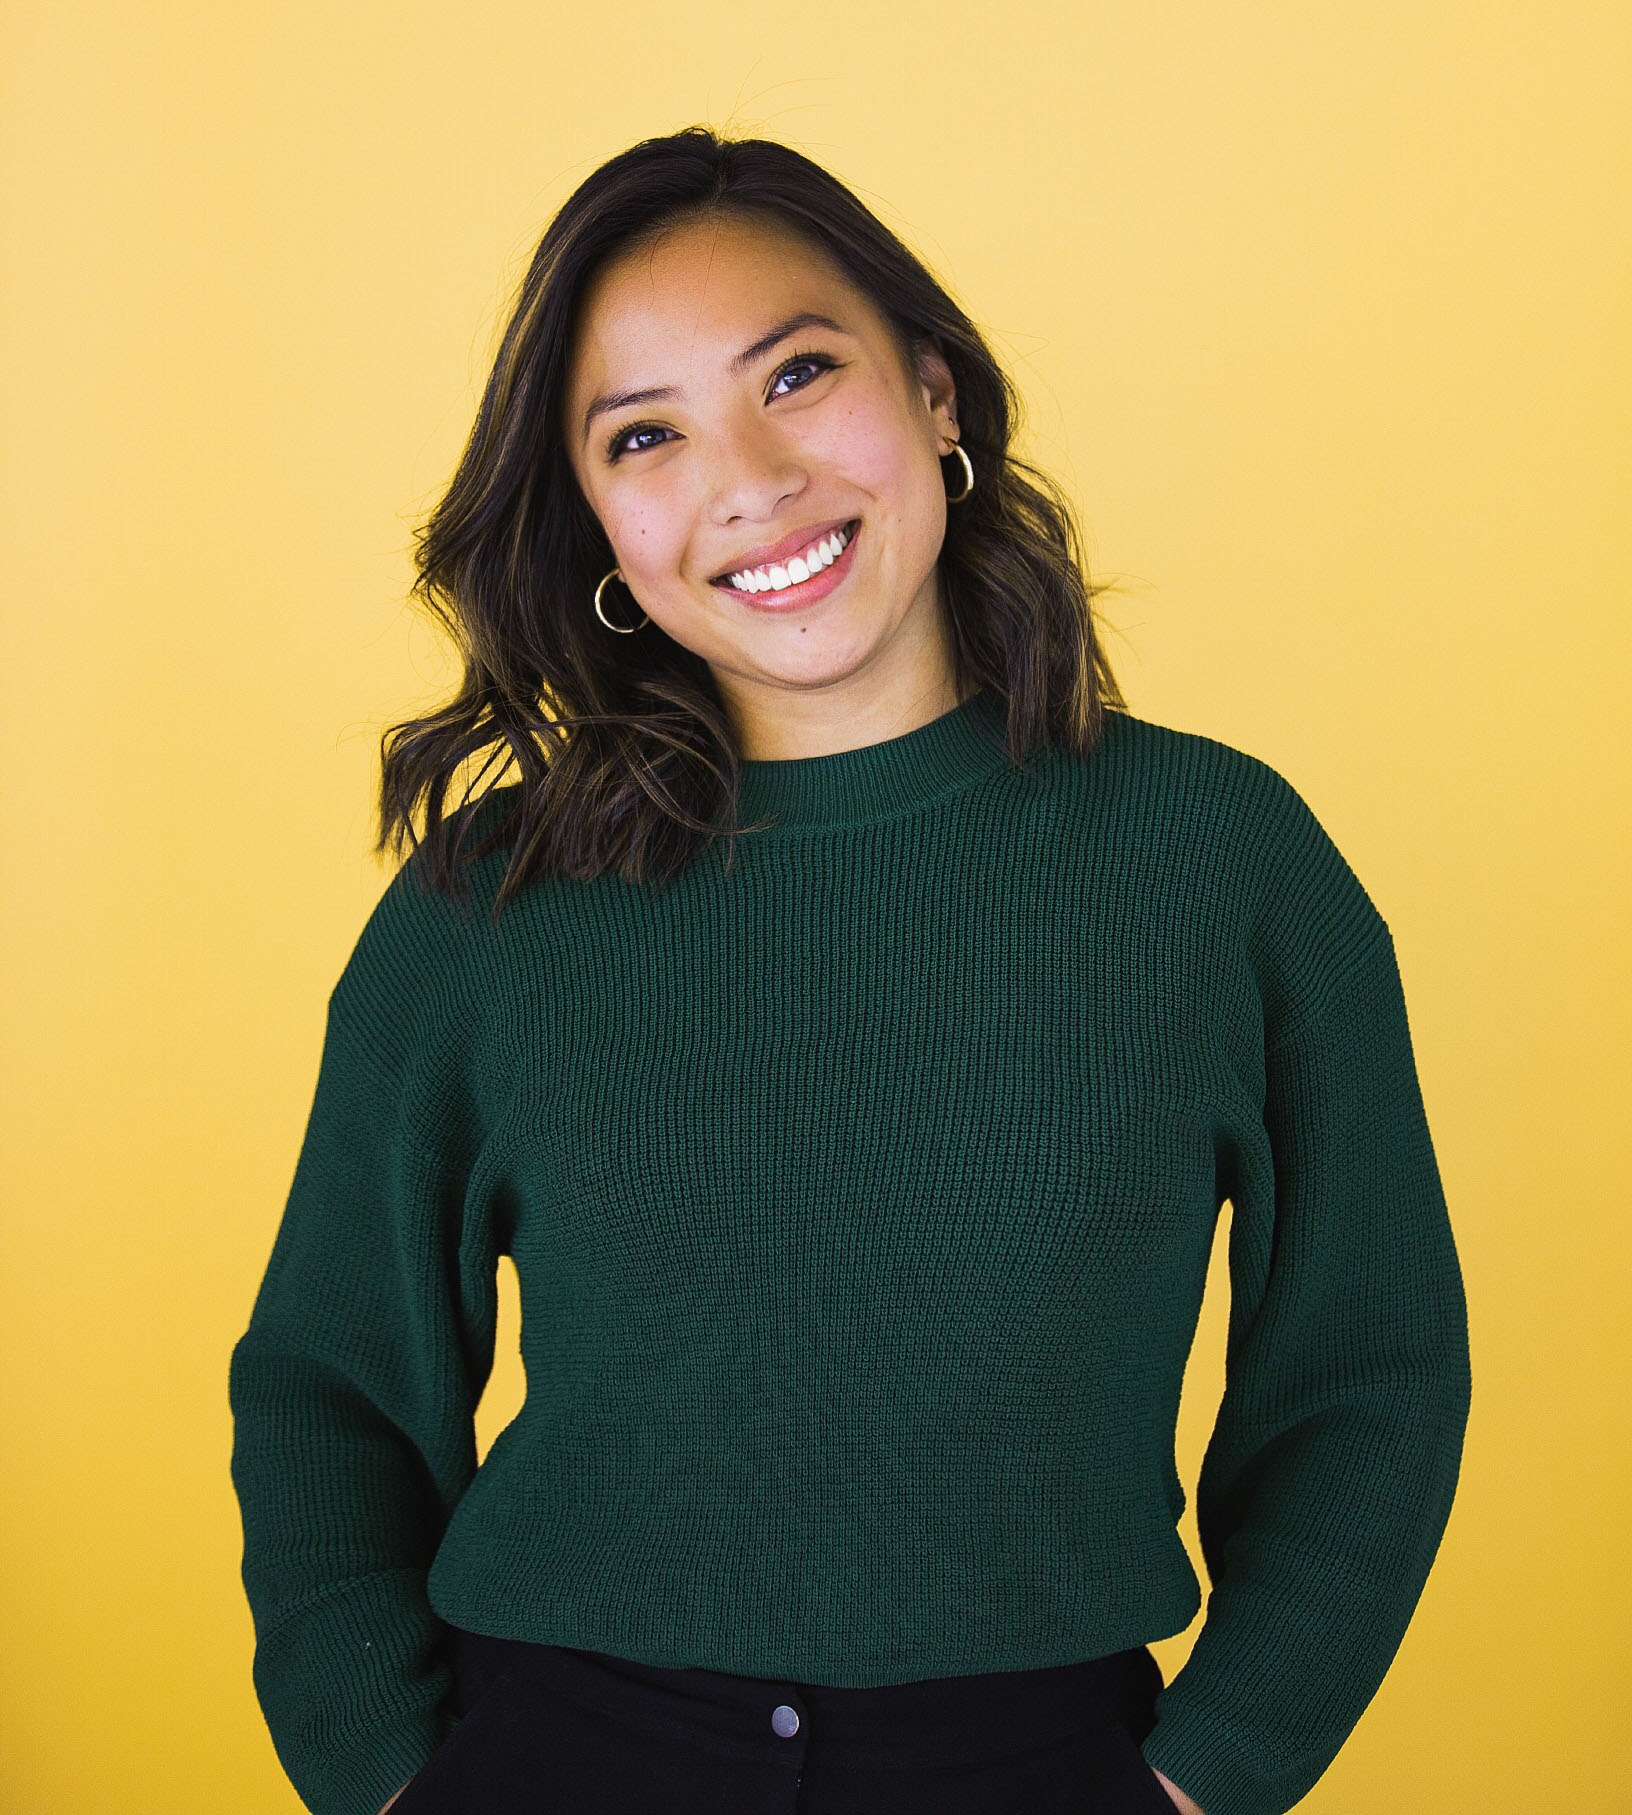 Nicole standing in front of a yellow background